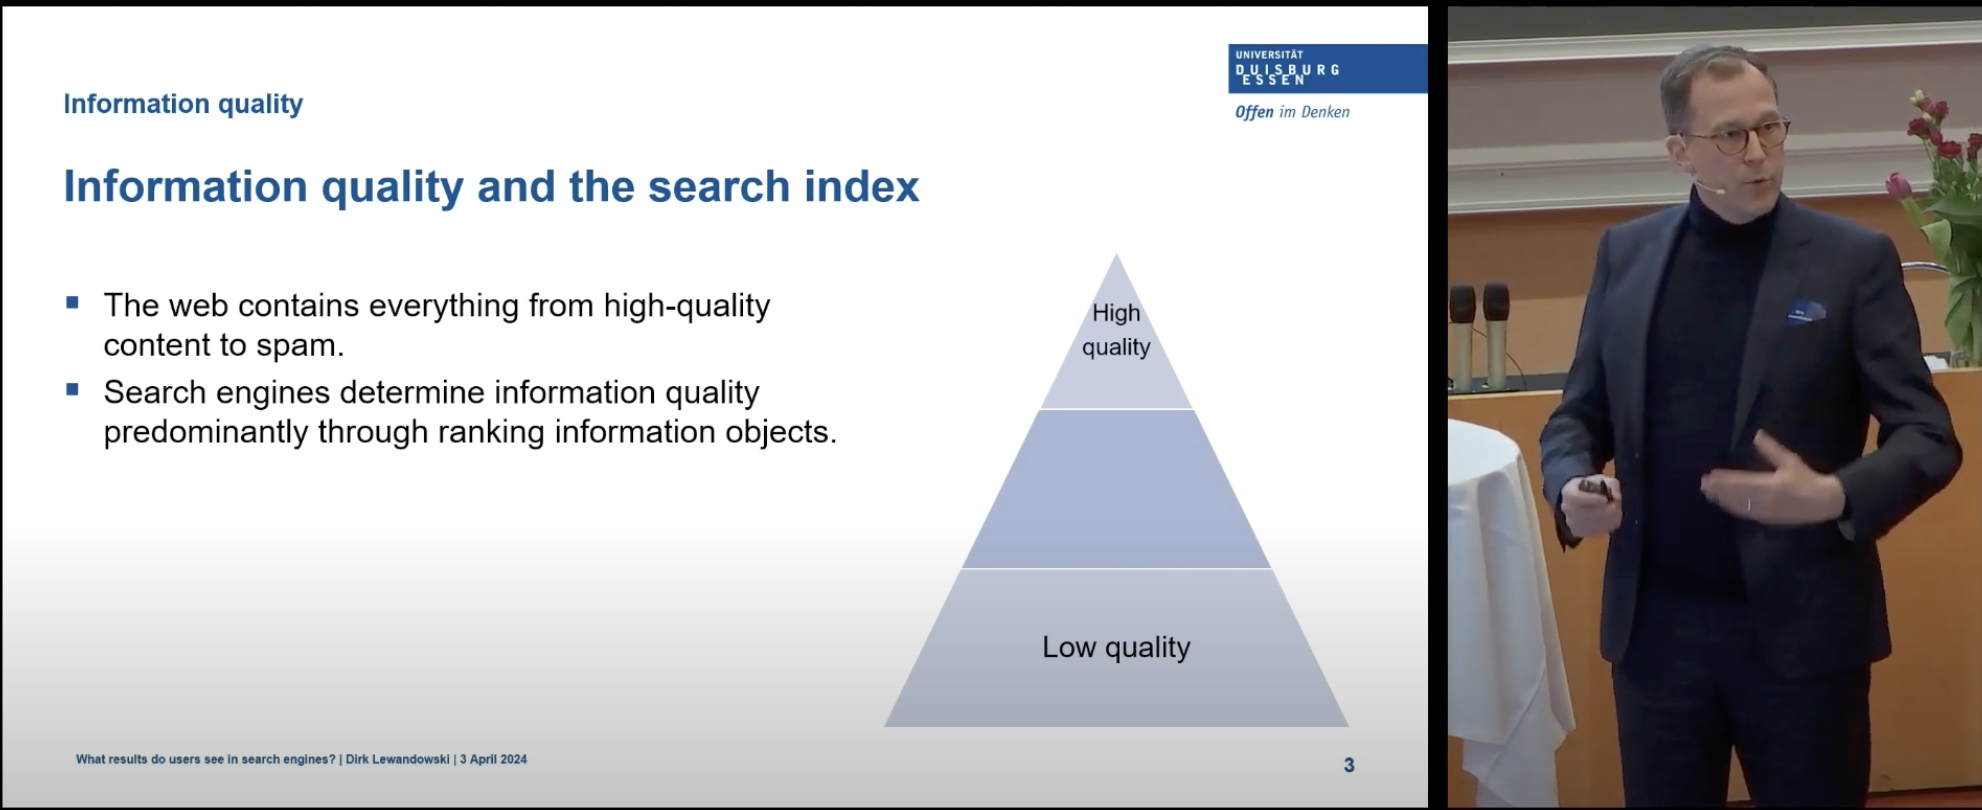 What results do users see in search engines